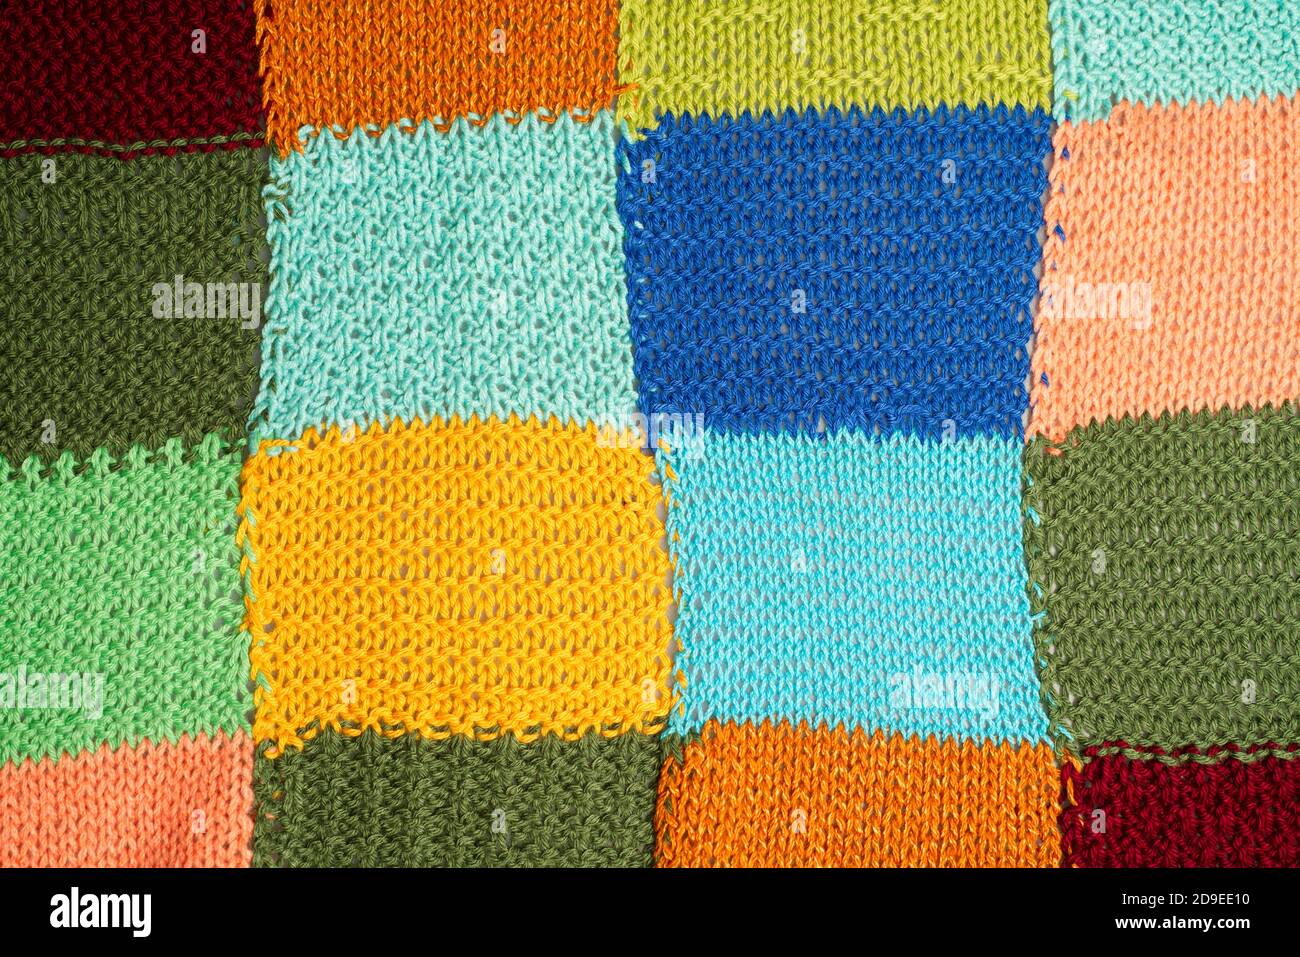 Full Frame Shot Of Multi Colored Patterned Woolen Textile Stock Photo